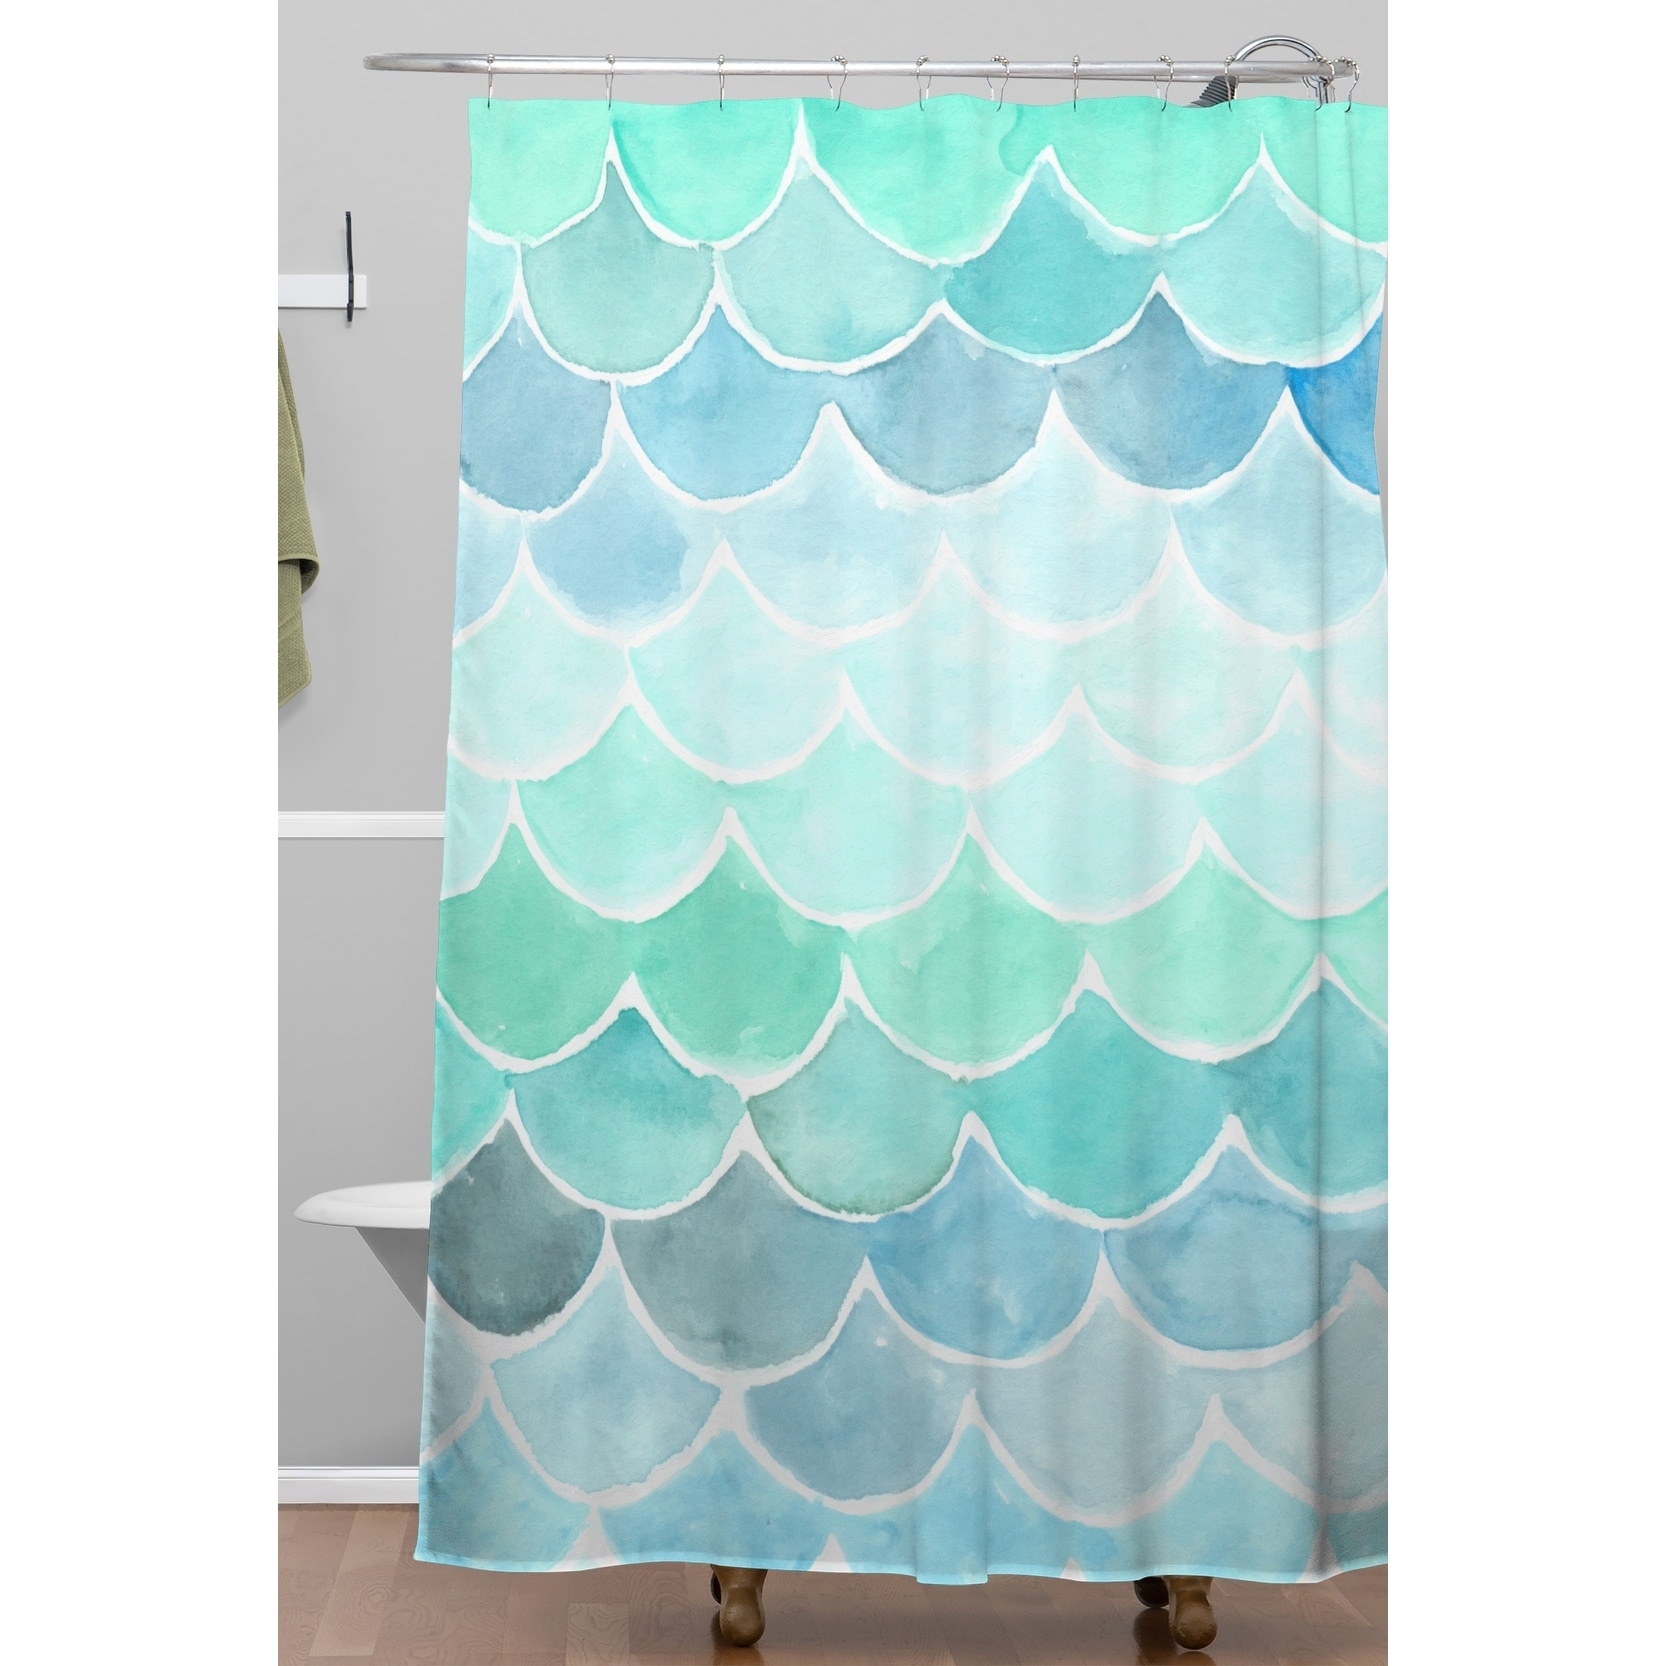 Detail Mermaid Scales Shower Curtain Nomer 4